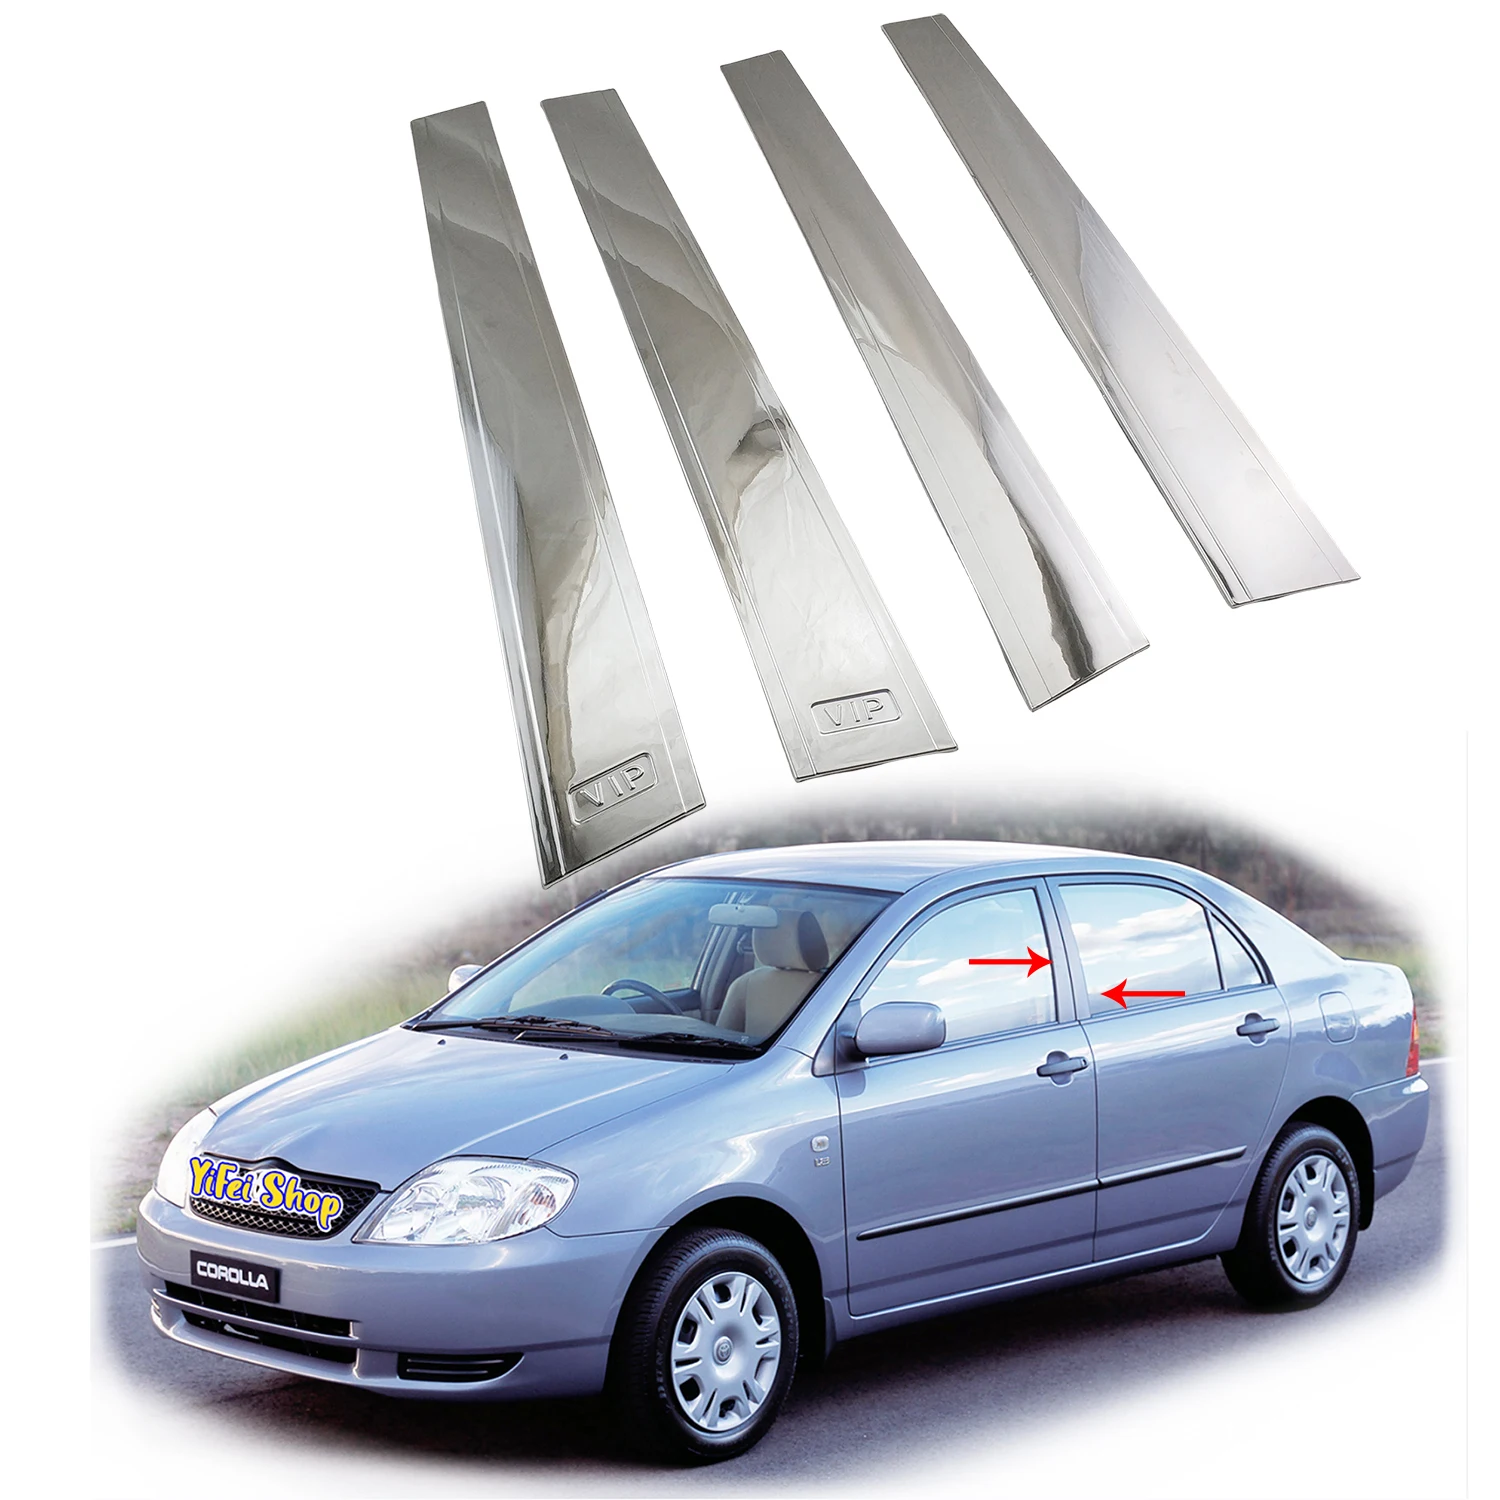 

4pc New Car ABS Chrome Accessories Plated 2001 2002 2003 2004 2005 2007 For Toyota Corolla Door Pillar Cover Trim Paste Style